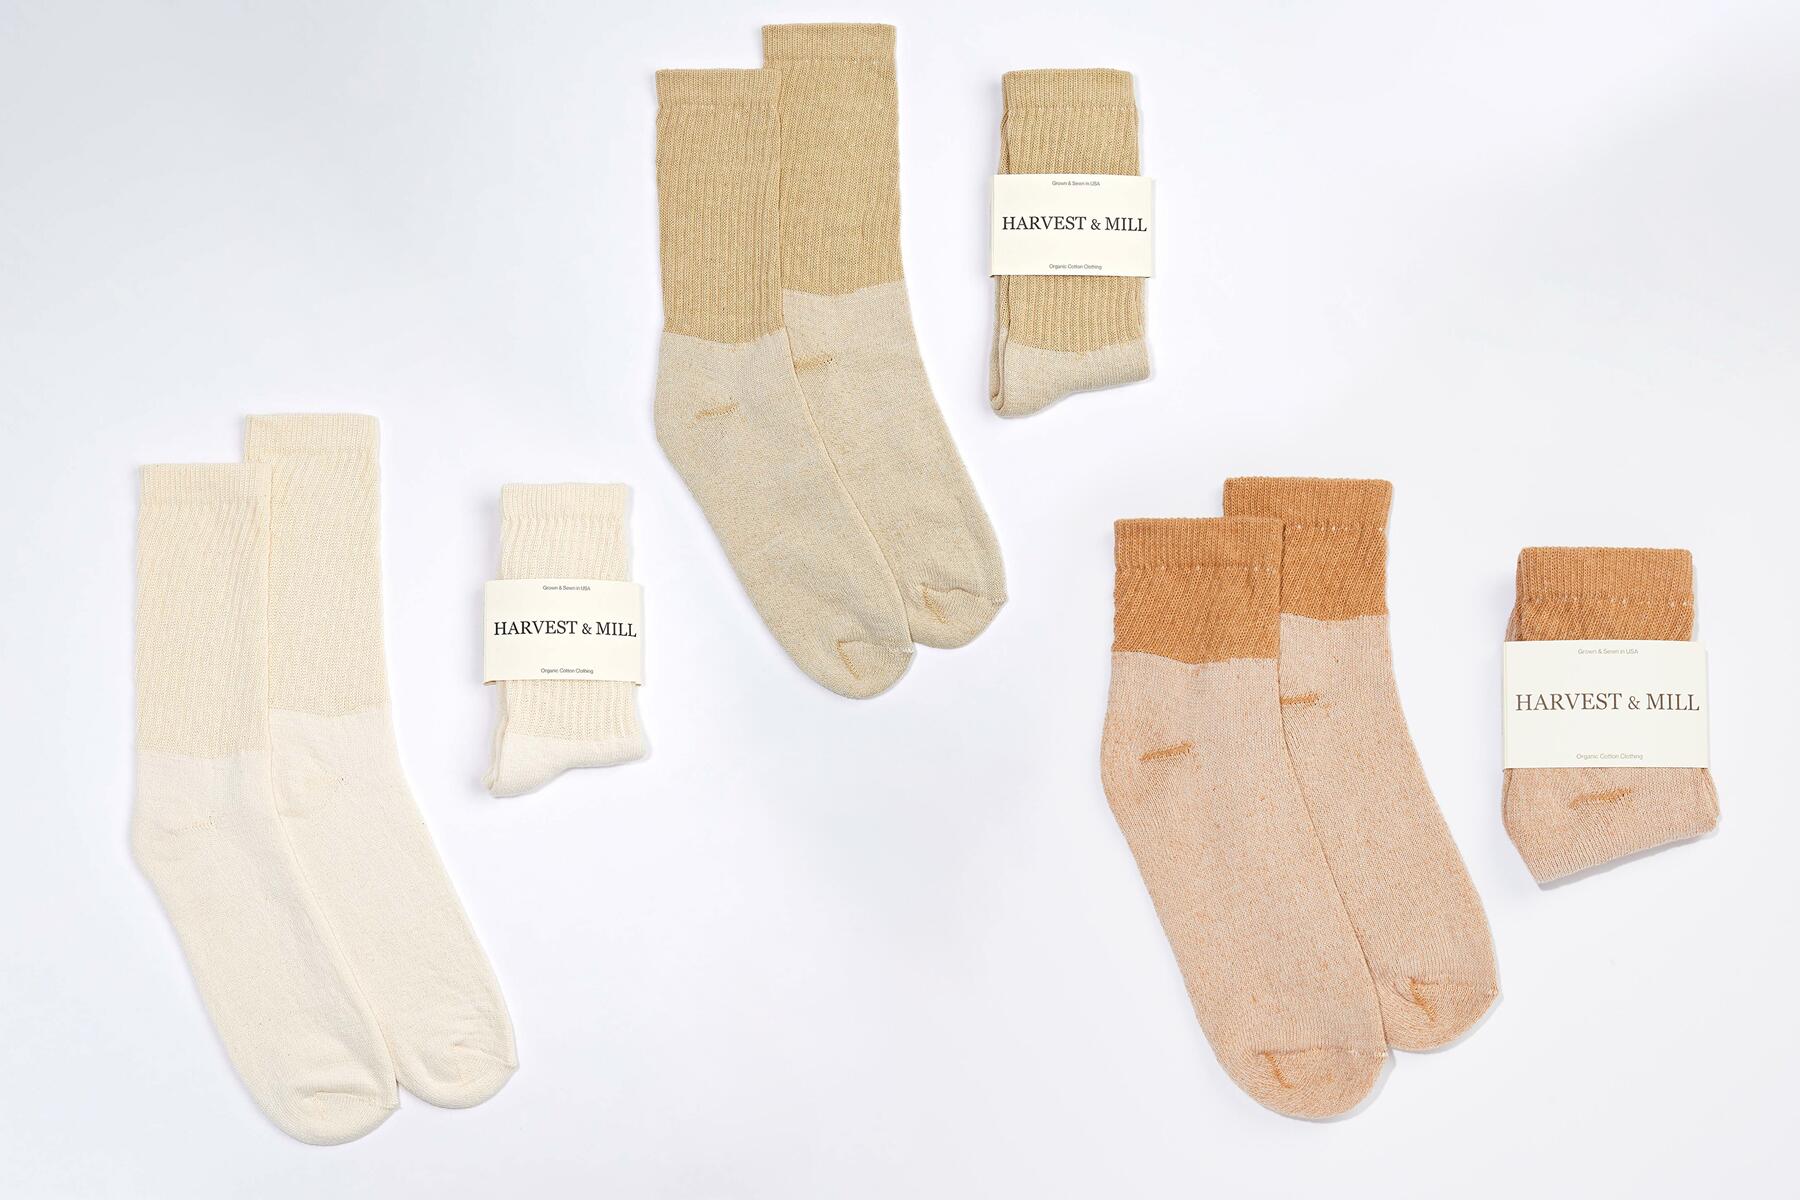 Shop These Sustainable Brands for an Eco-Friendly Holiday Season